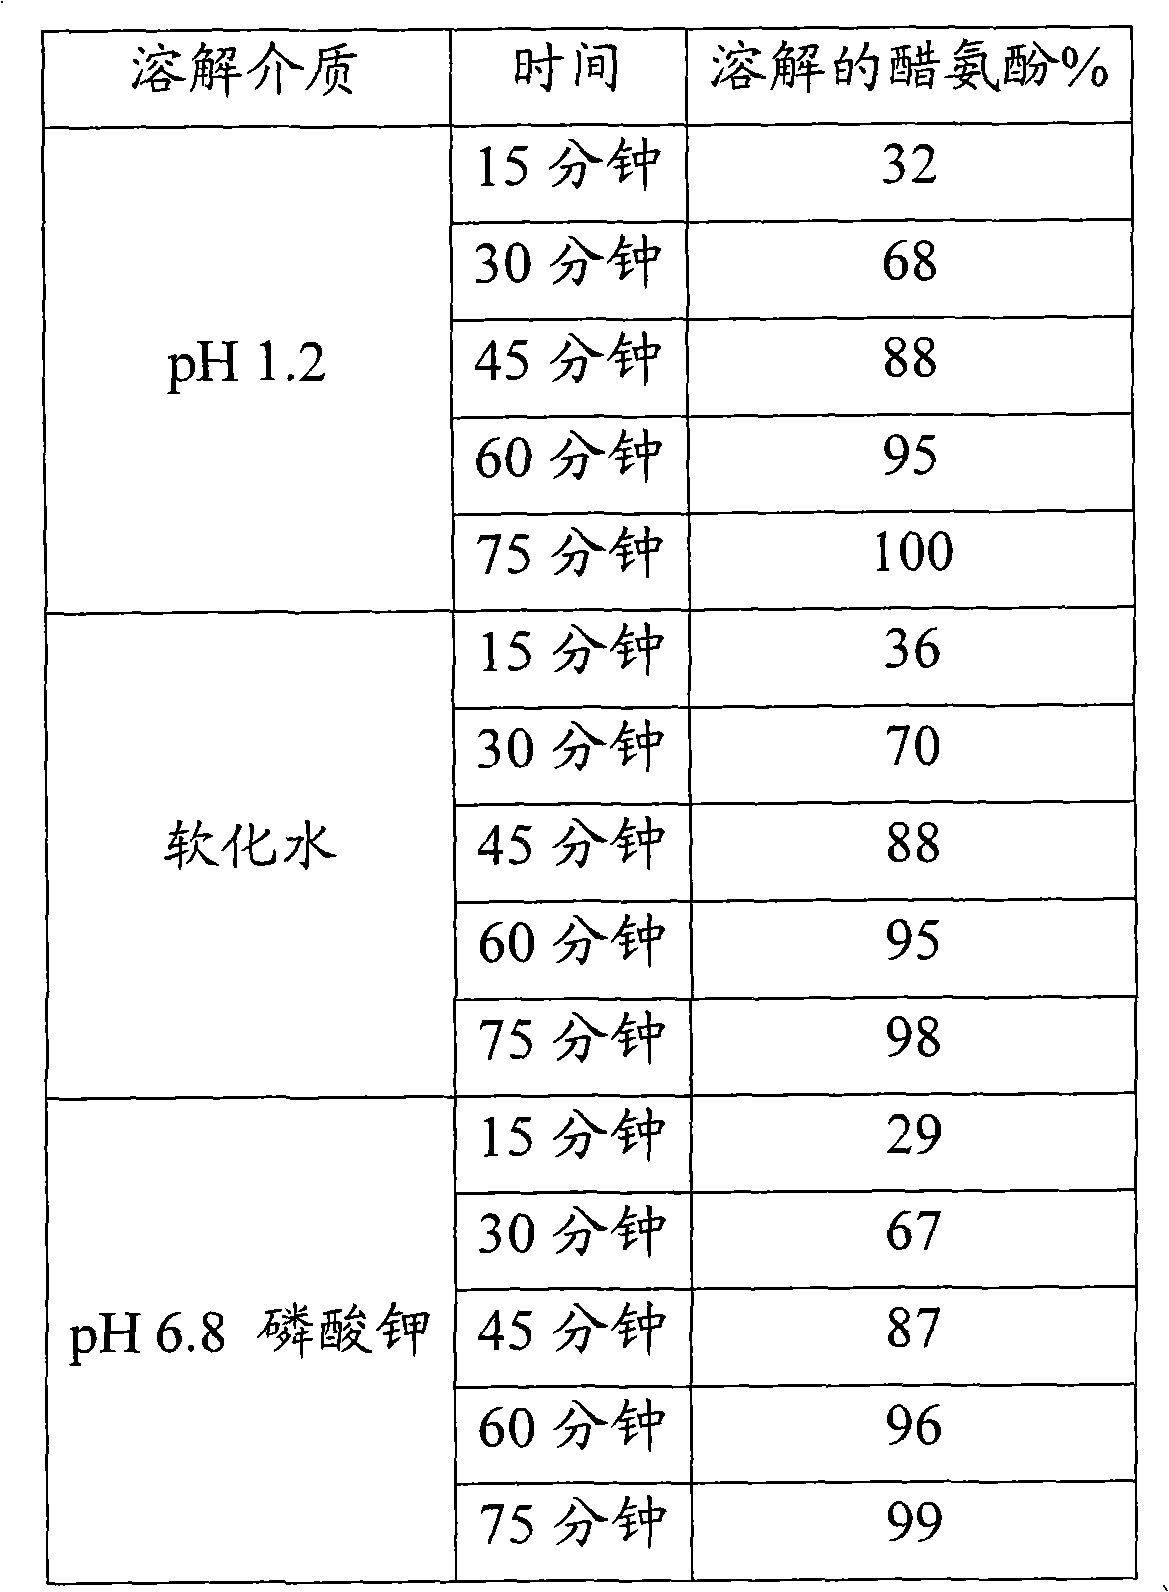 Hydroxypropyl methyl cellulose hard capsules and process of manufacture